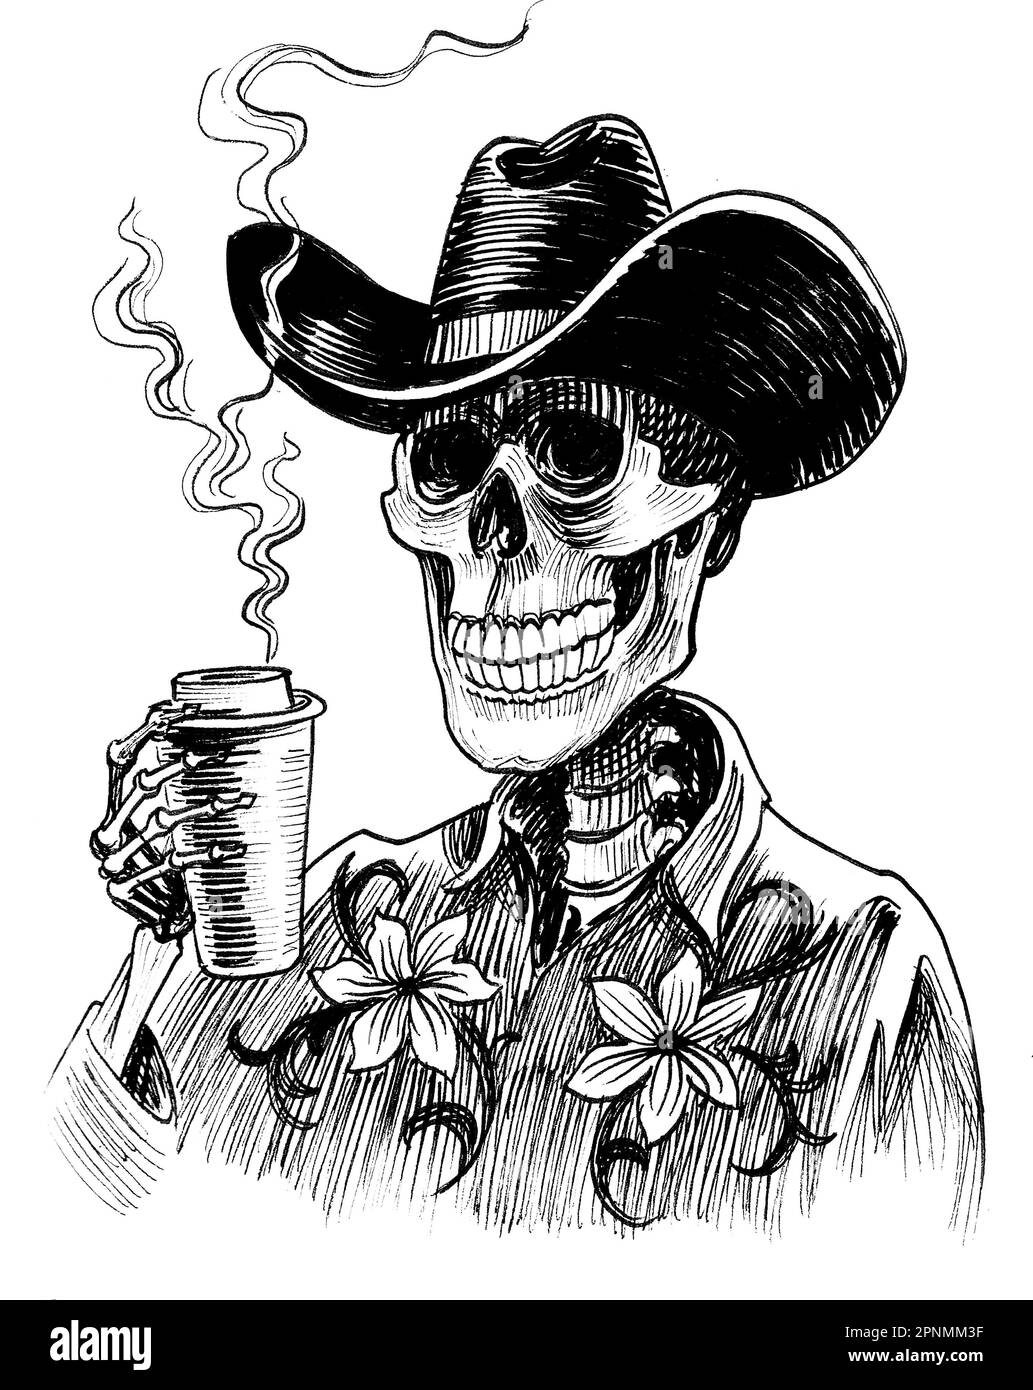 Skeleton in cowboy hat drinking a cup of coffee. Ink black and white drawing Stock Photo